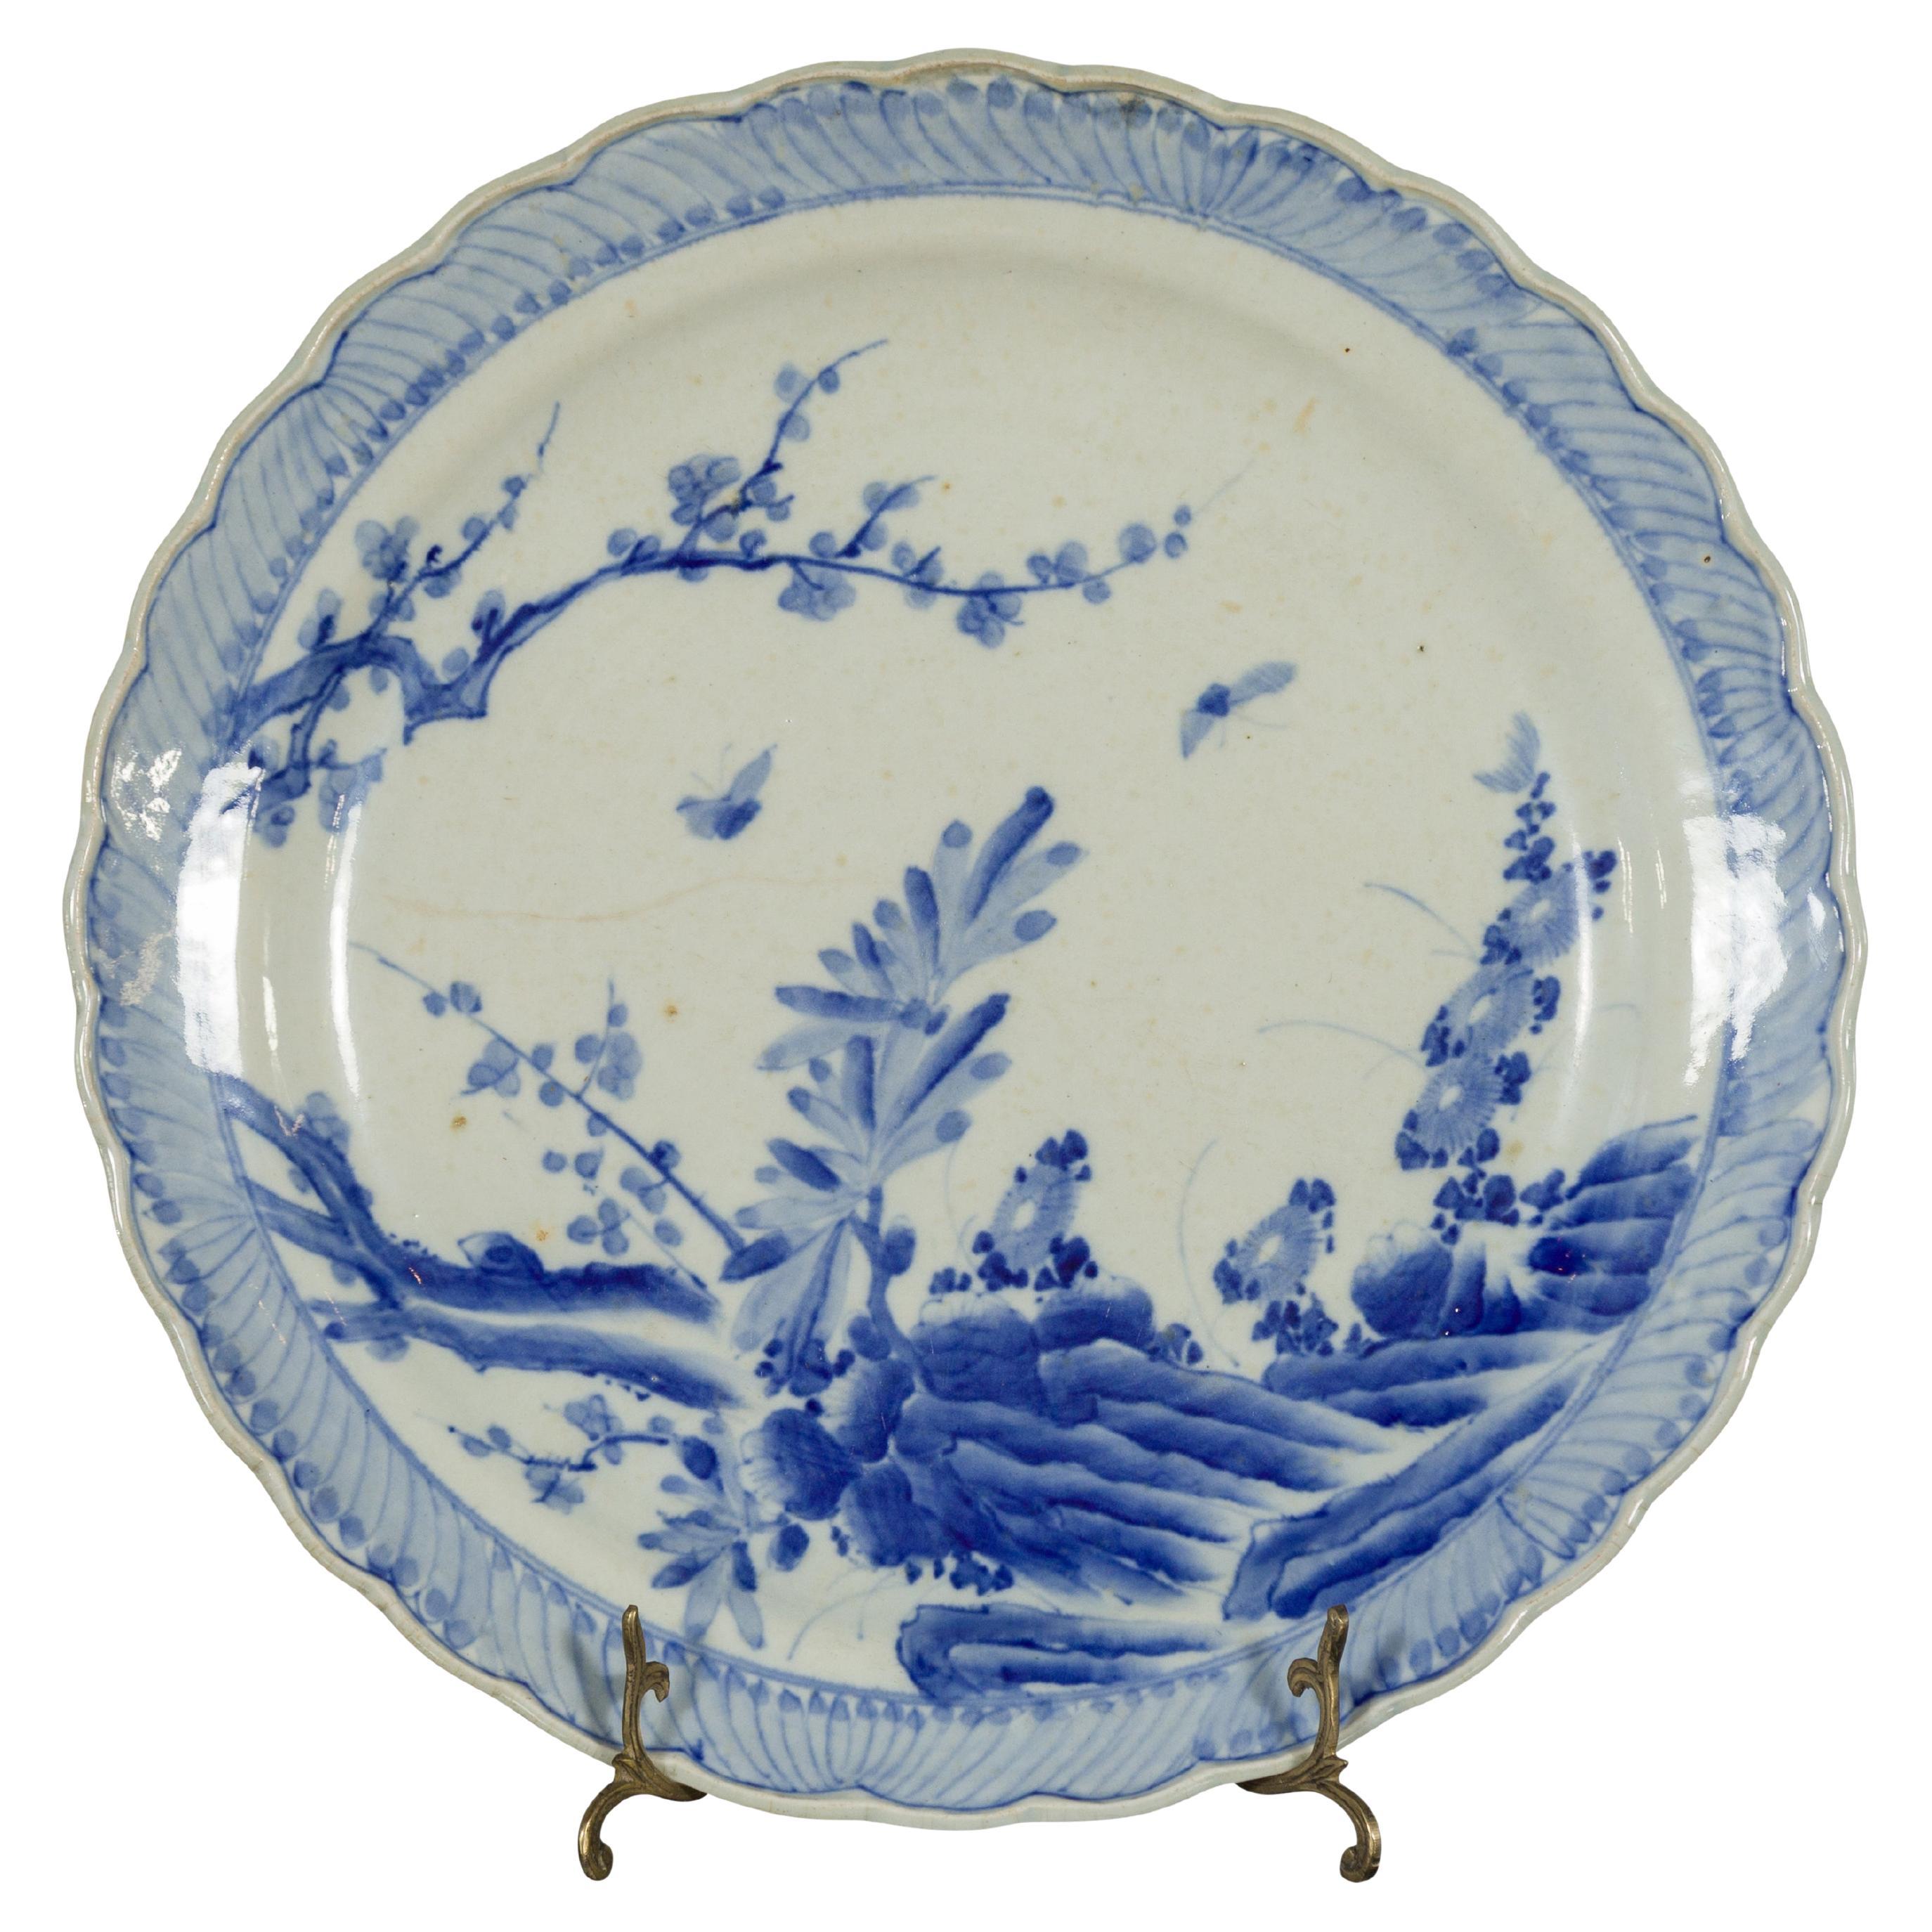 Japanese Blue and White Hand-Painted Porcelain Charger Plate with Foliage Décor For Sale